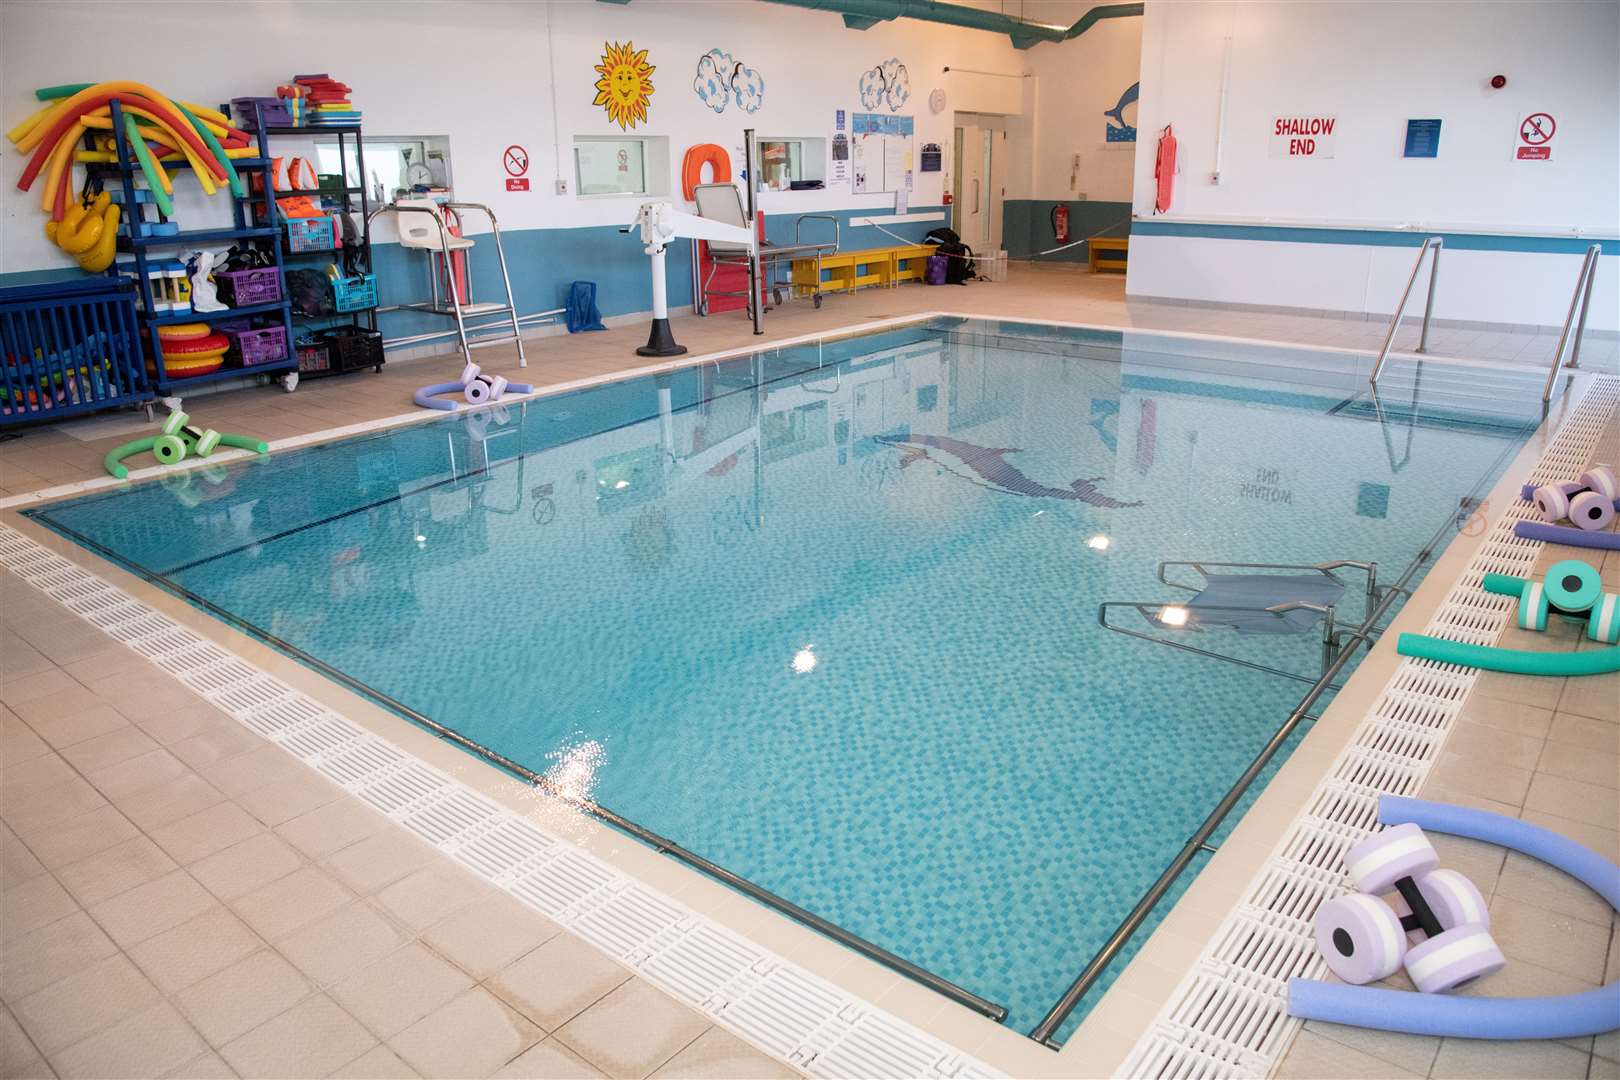 Moray Hydrotherapy Pool, Burdsyard Road, Forres. Picture: Daniel Forsyth.